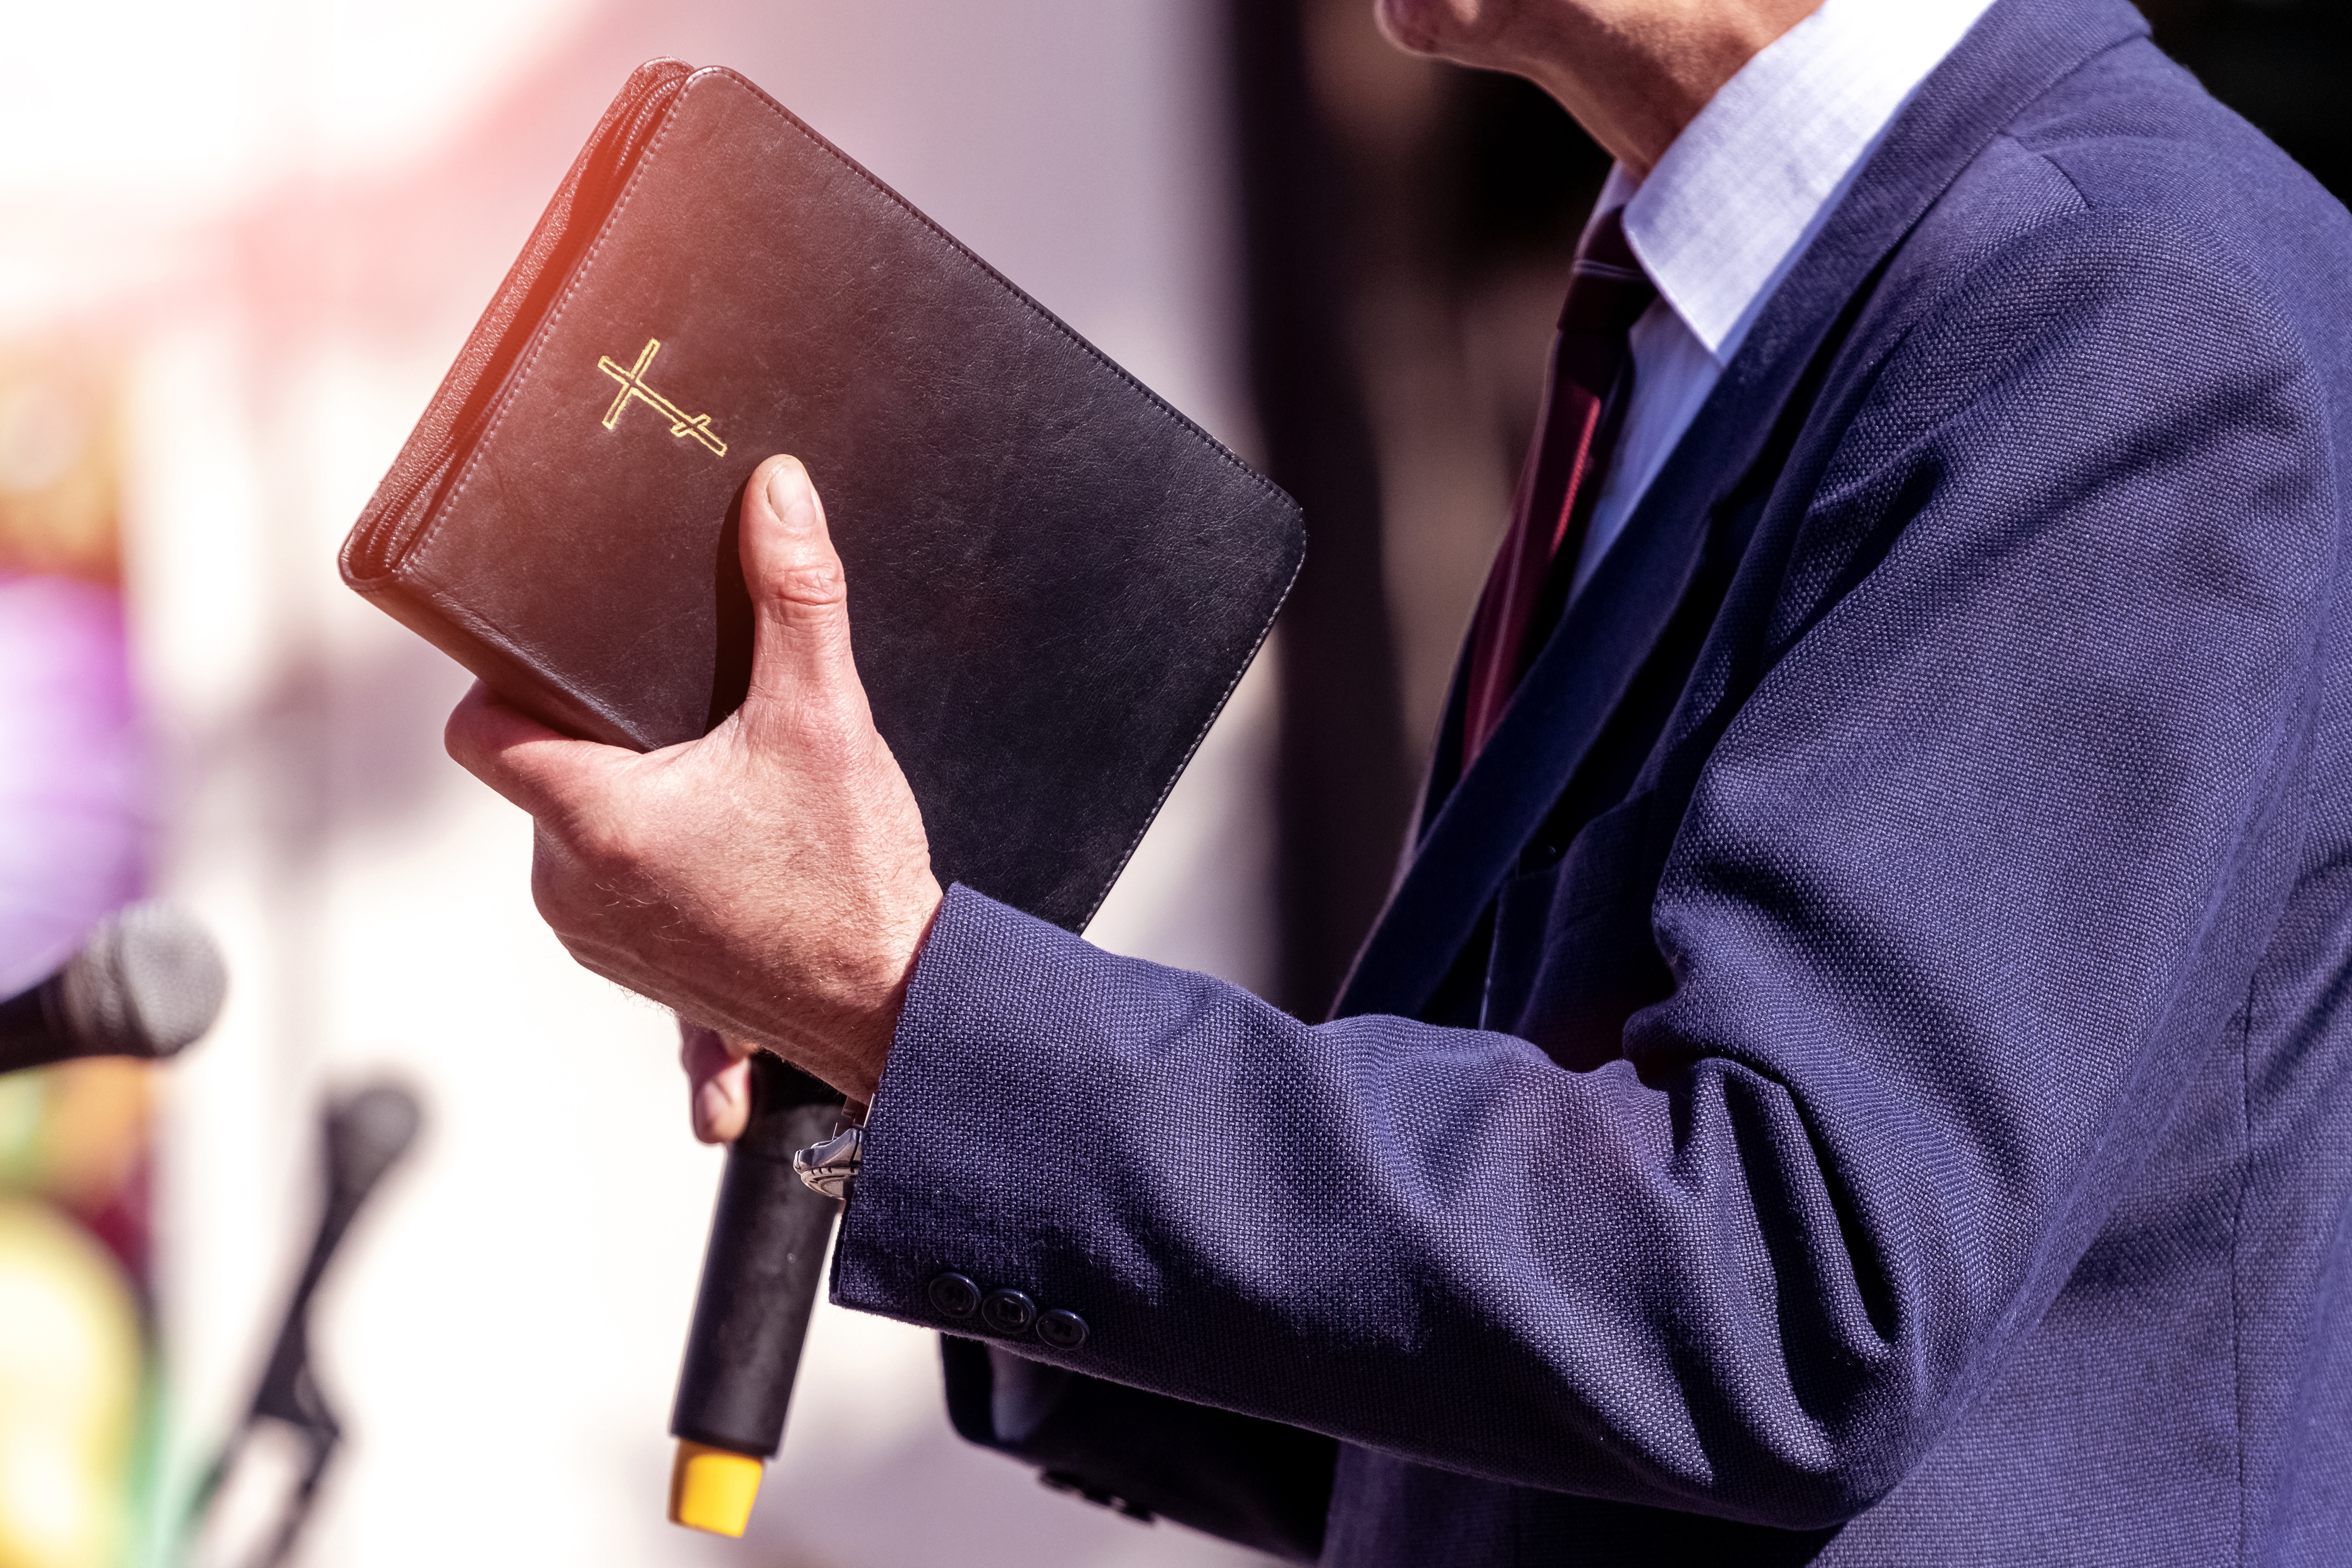 A pastor holding his Bible during a sermon | Source: Shutterstock